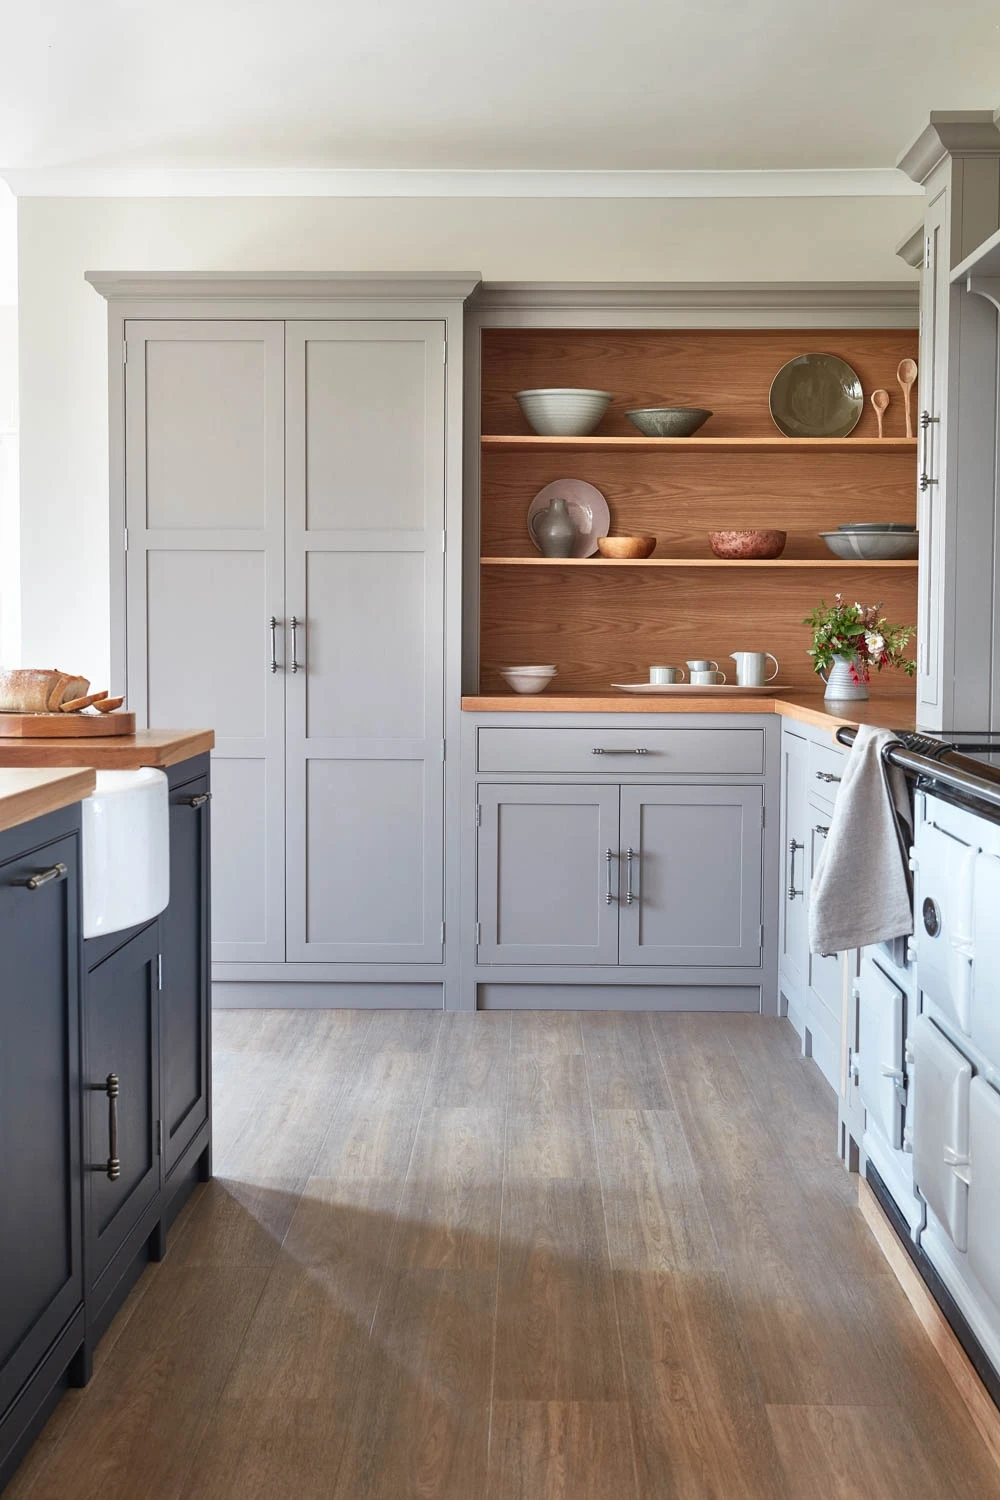 A classic kitchen with a farmhouse touch, boasting attractive shaker cabinets and an Aga. Traditional features like corbels, beading and cornice complete the traditional look